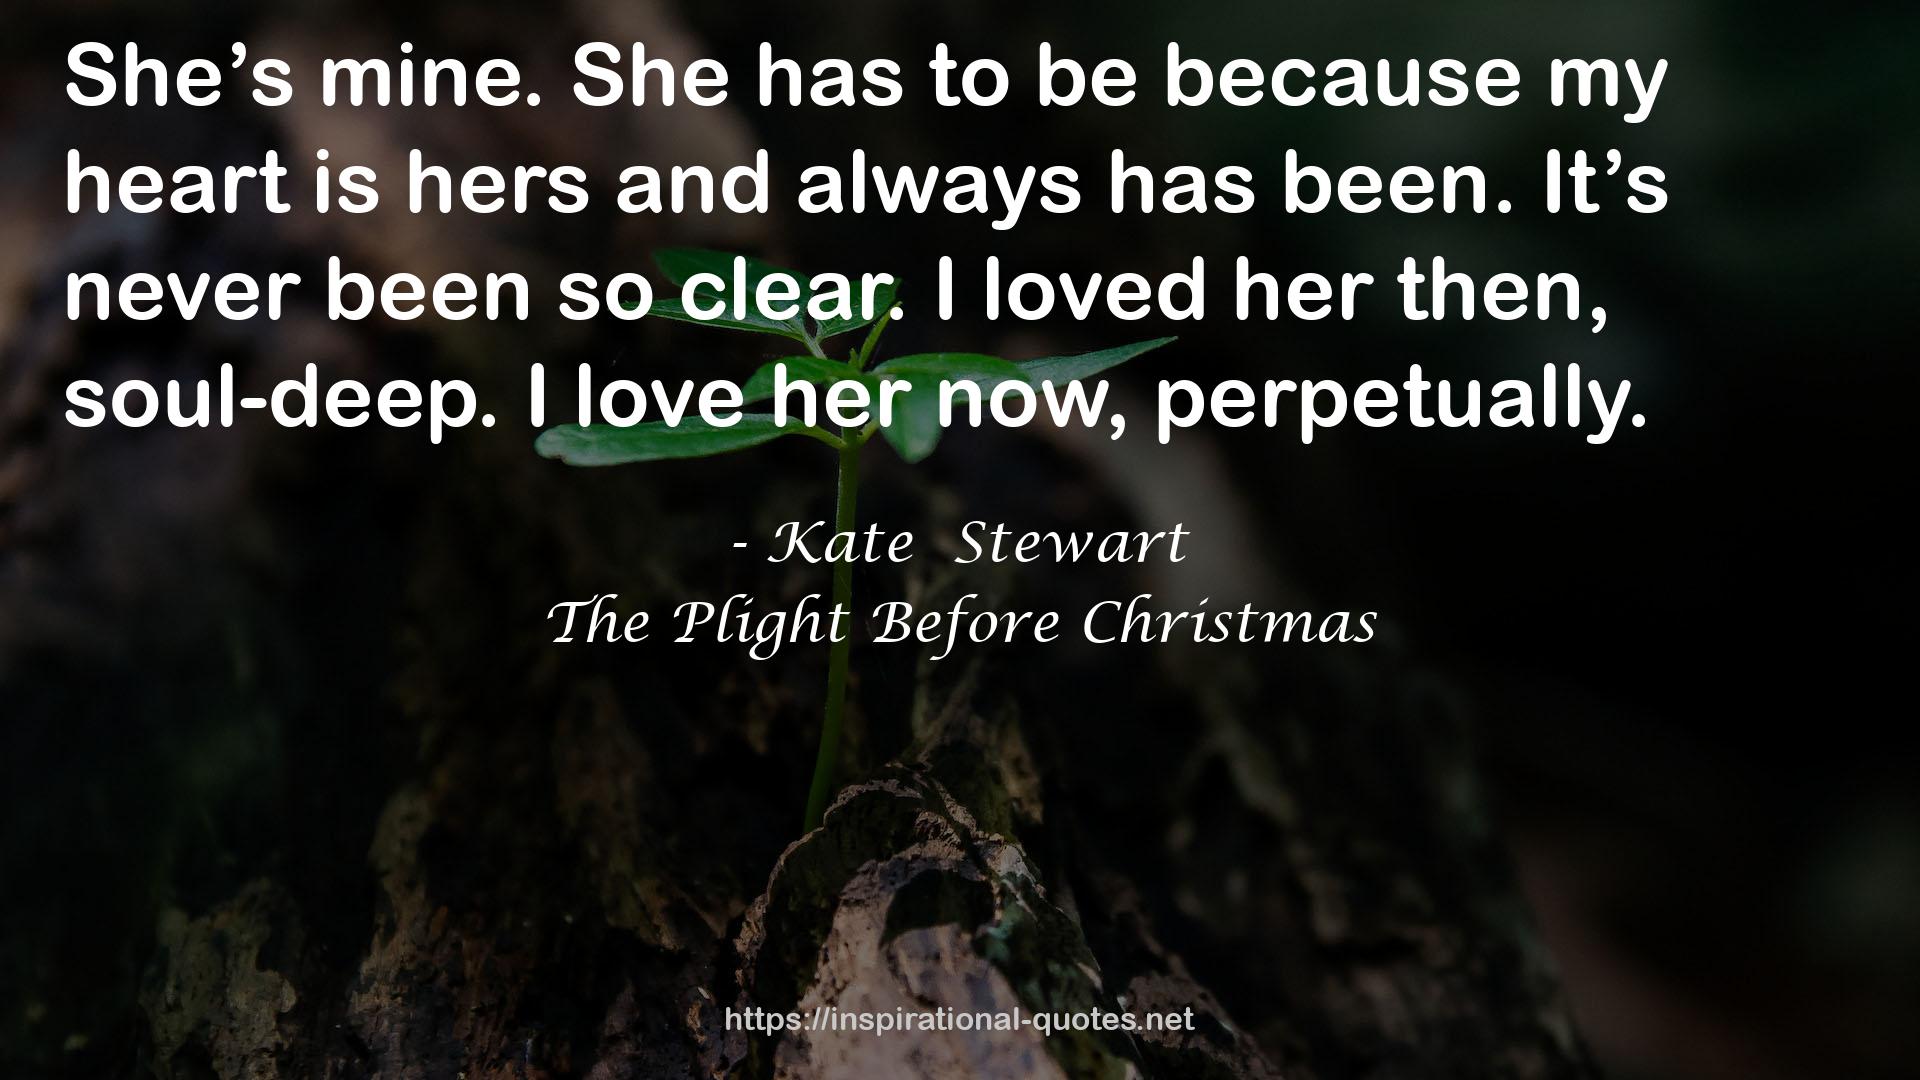 The Plight Before Christmas QUOTES